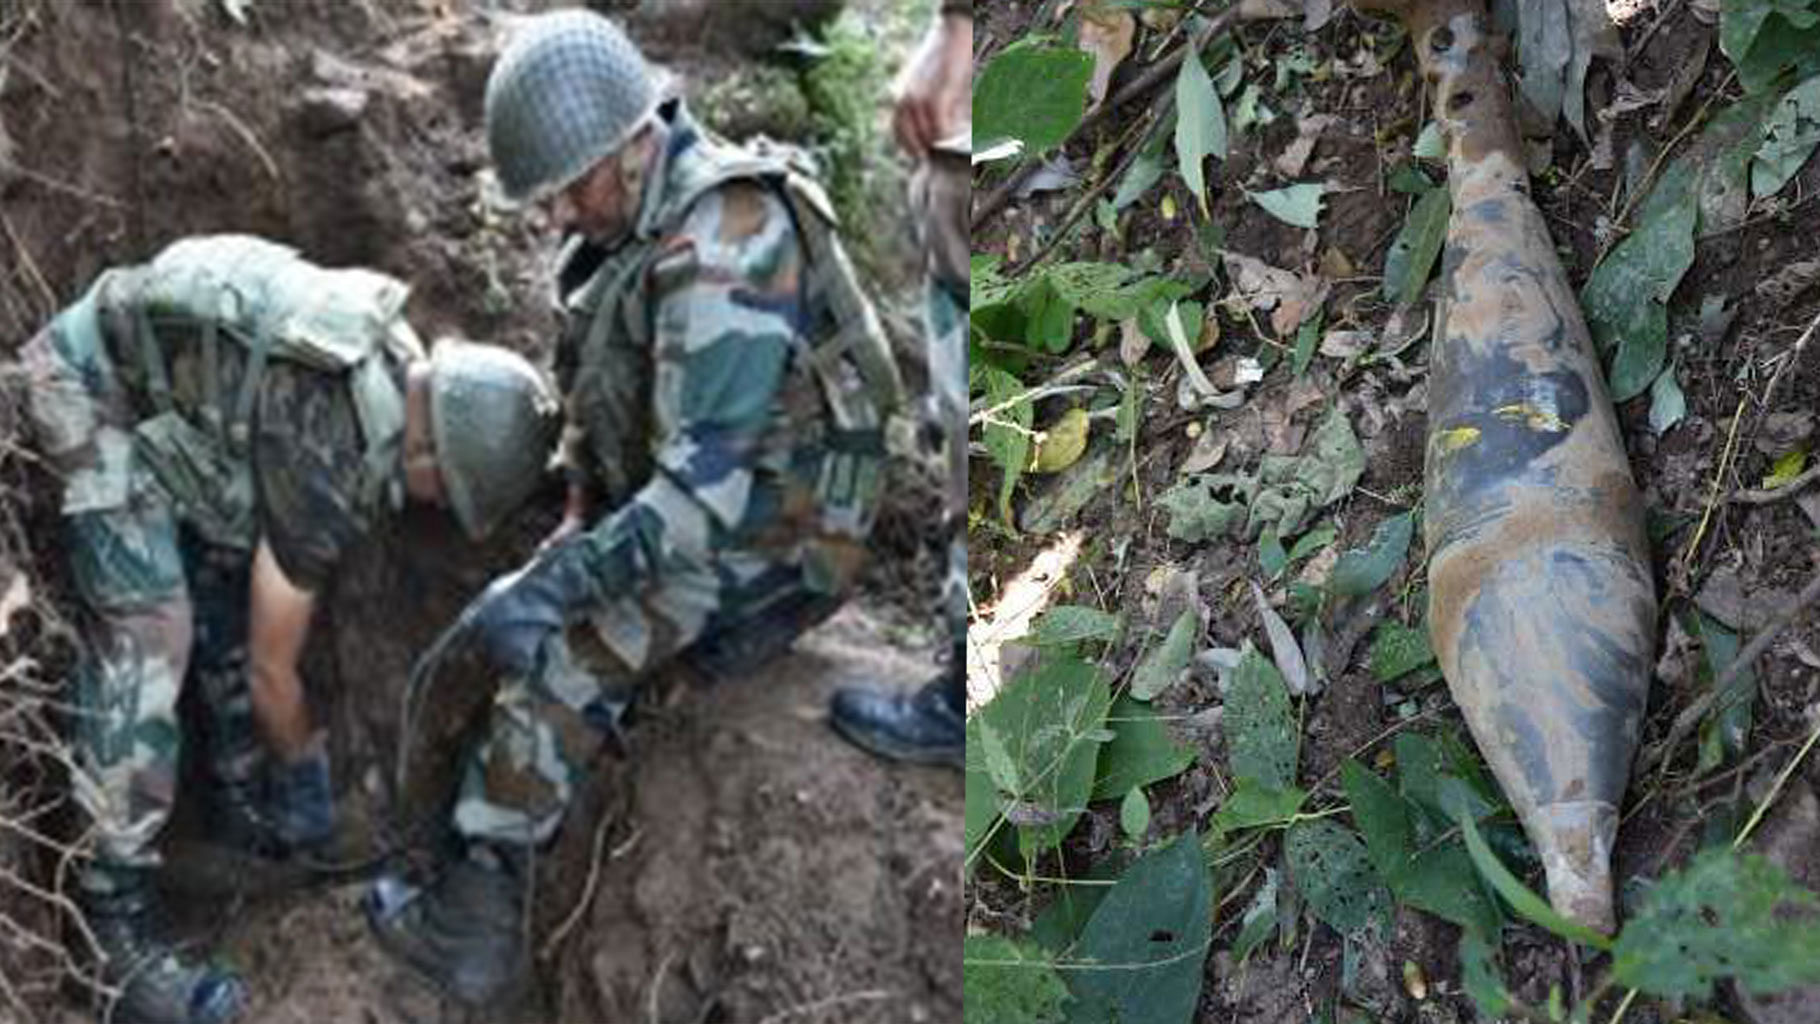 Indian Army destroyed 3 live mortar shells after Pakistan violated ceasefire